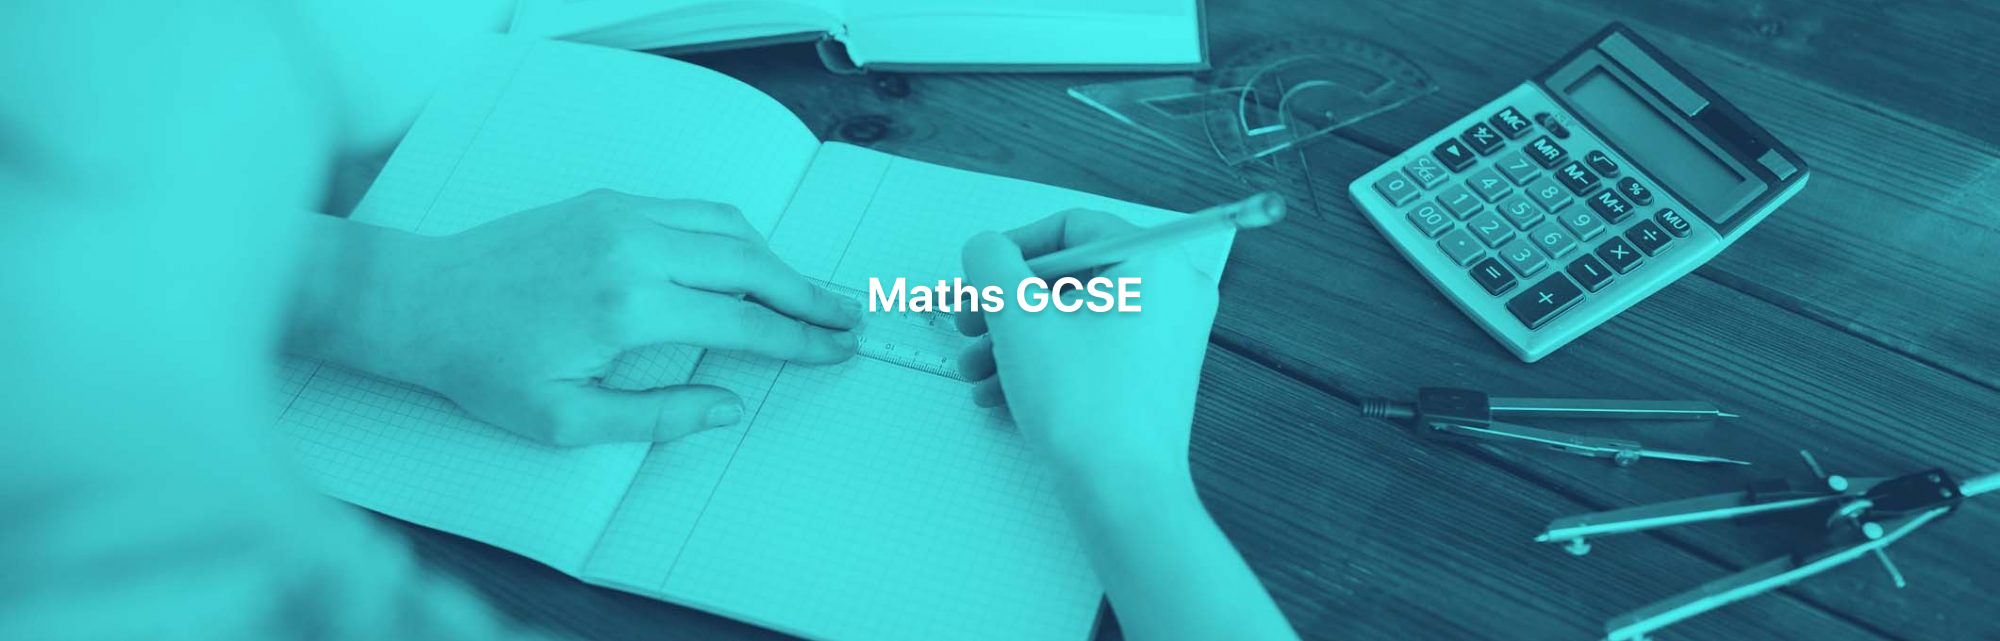 Maths GCSE Distance Learning Course by Oxbridge